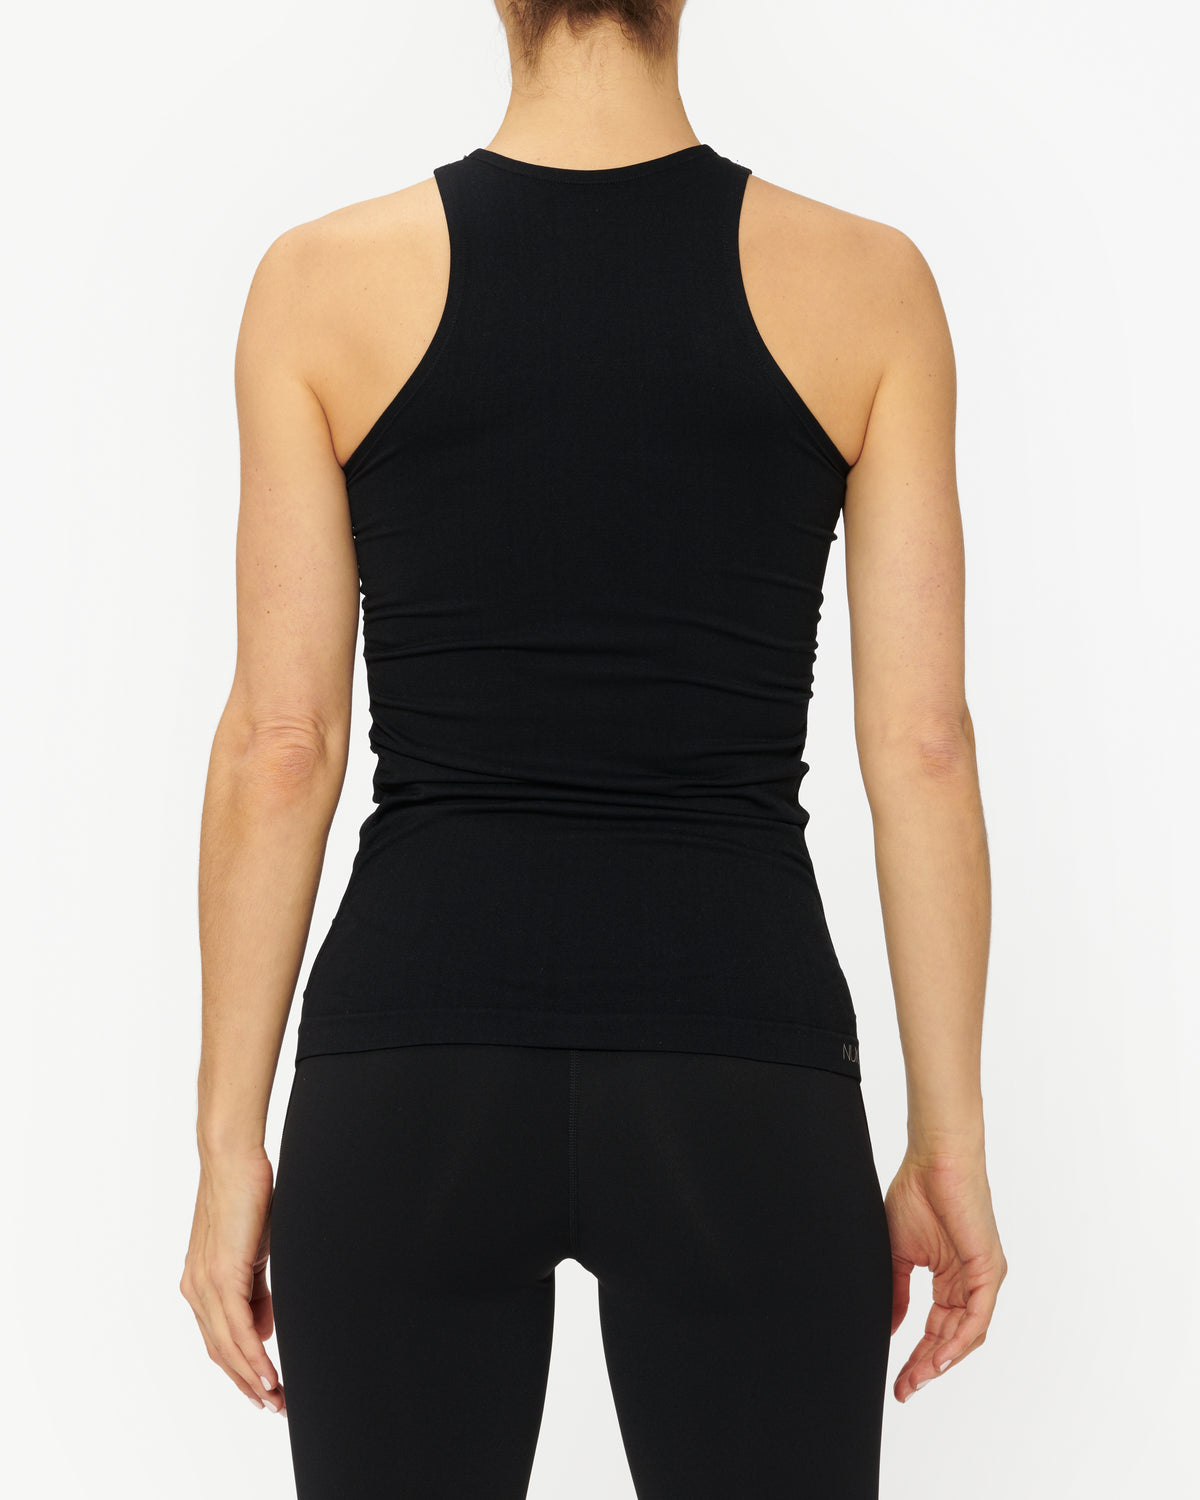 Nux New Groove Tank – The Shop at Equinox